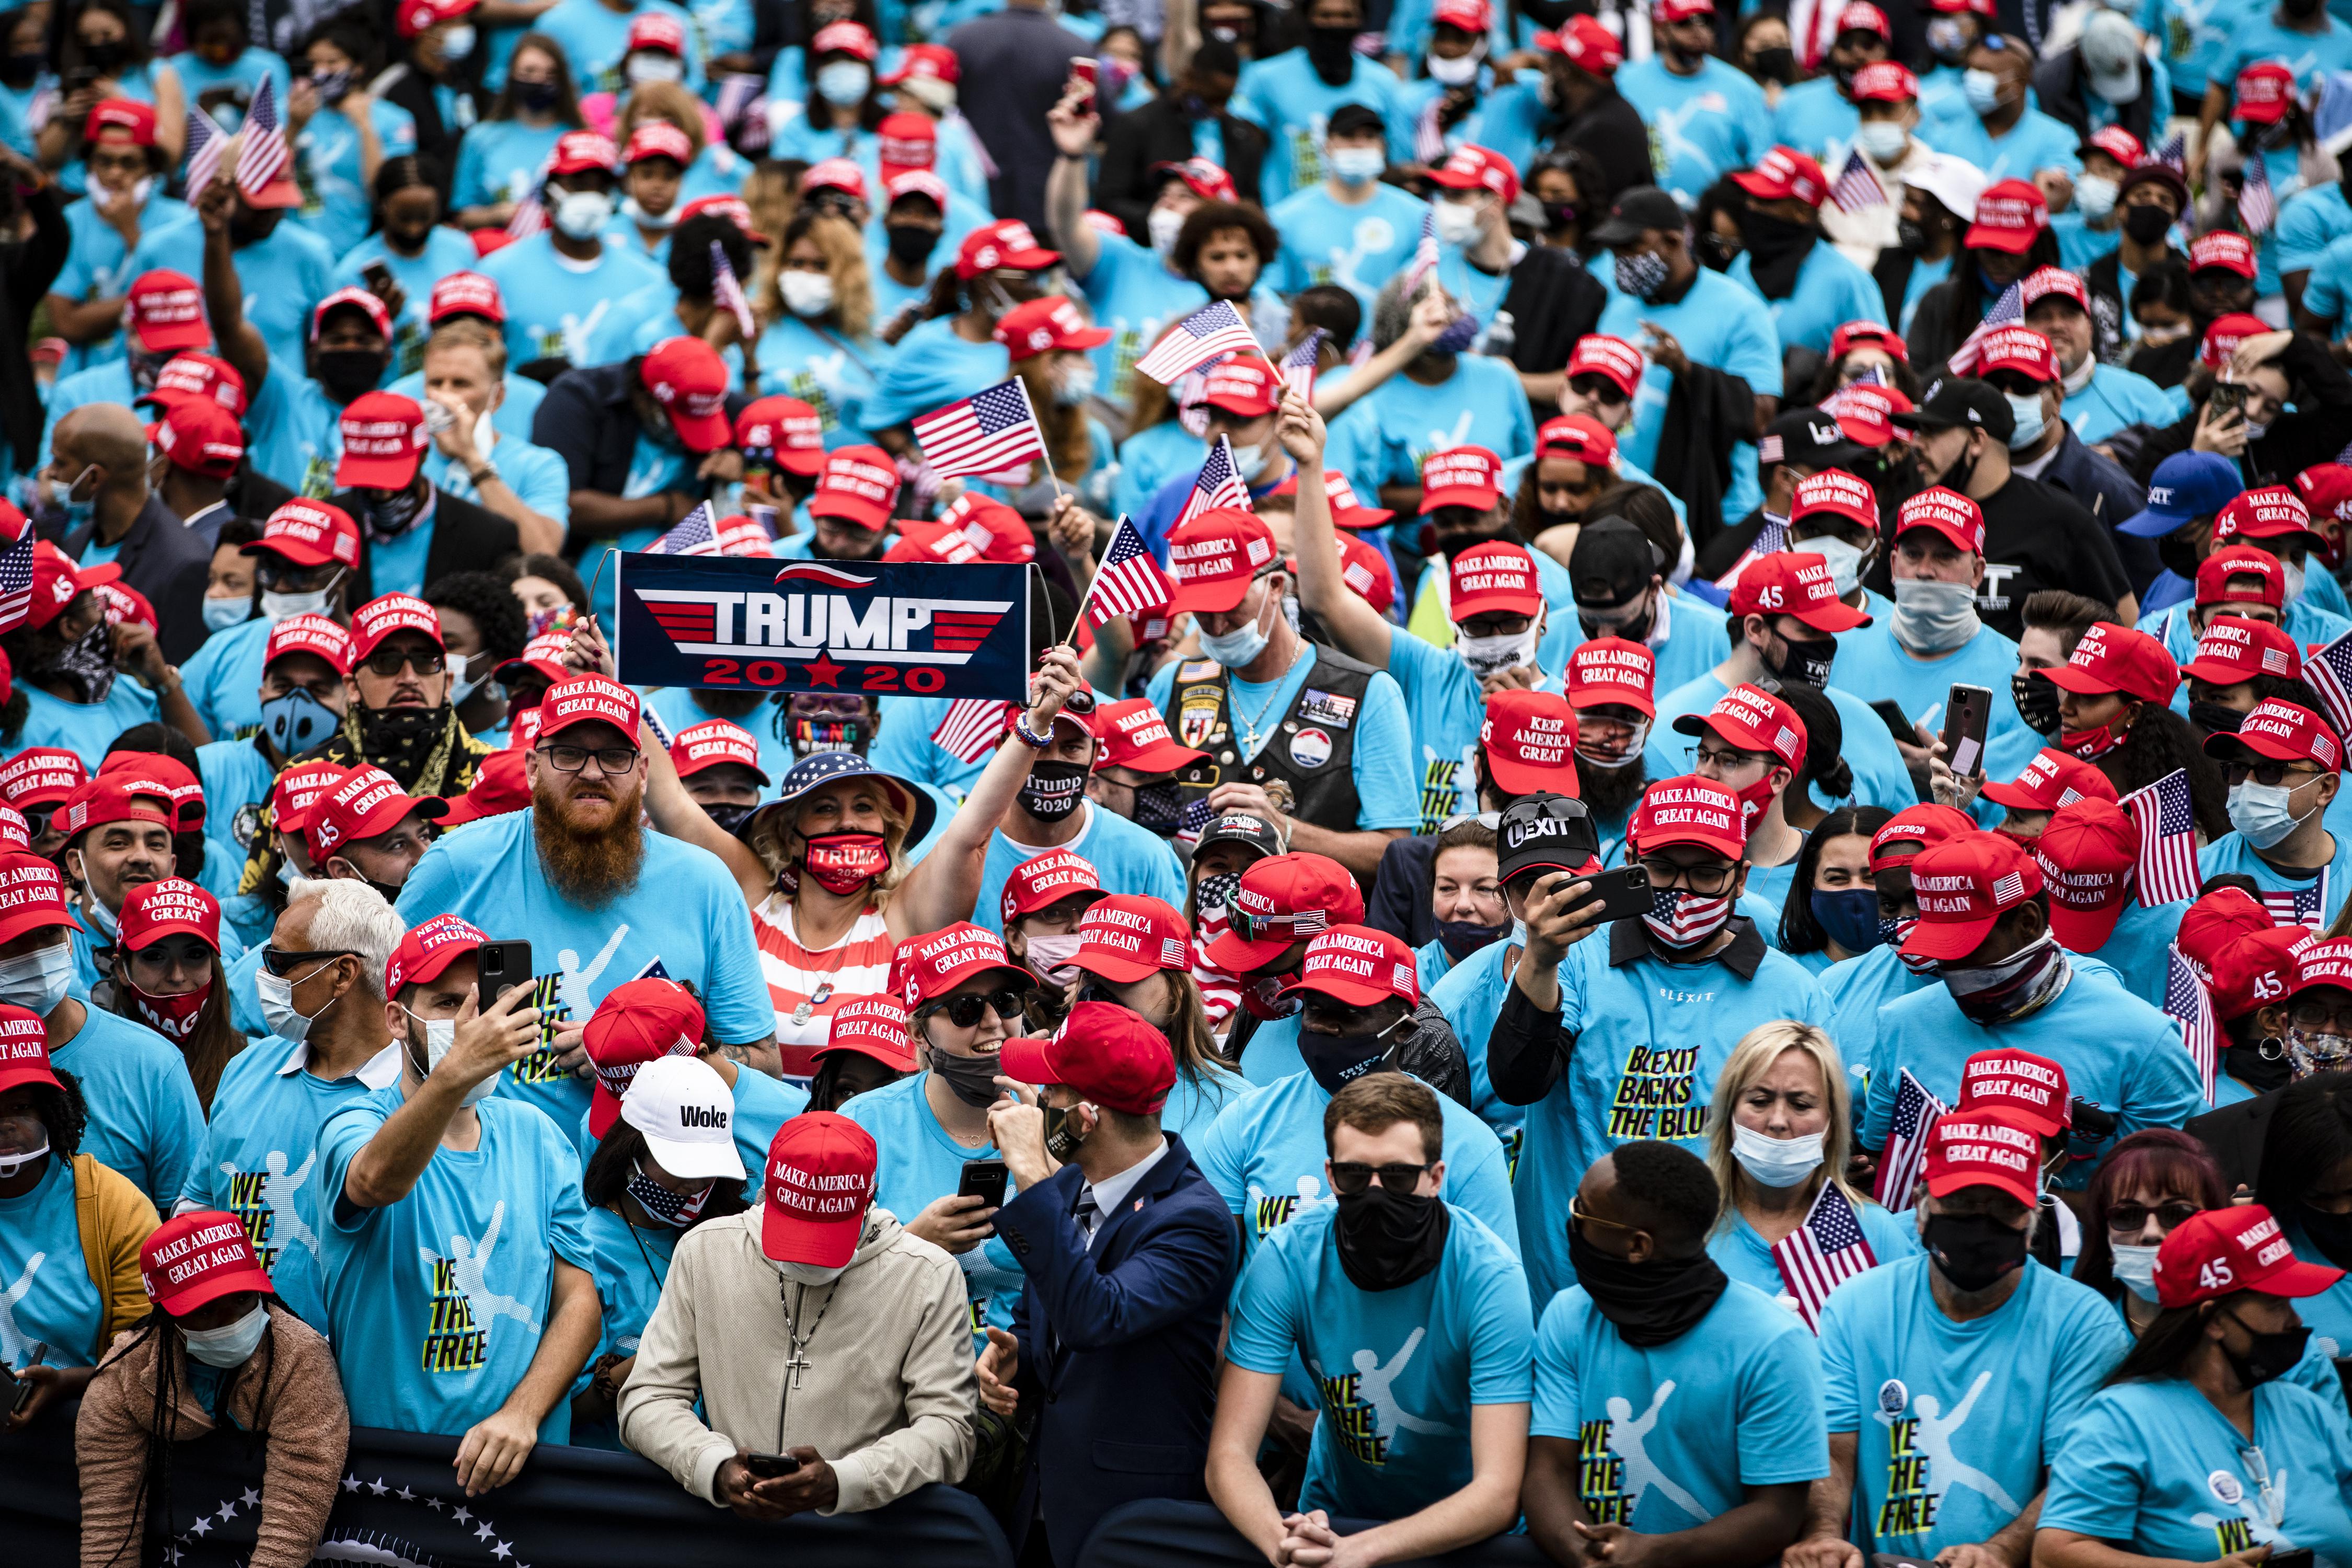 Supporters cheer as they wait for President Donald Trump to address a rally in support of law and order on the South Lawn of the White House on October 10, 2020 in Washington, D.C. 